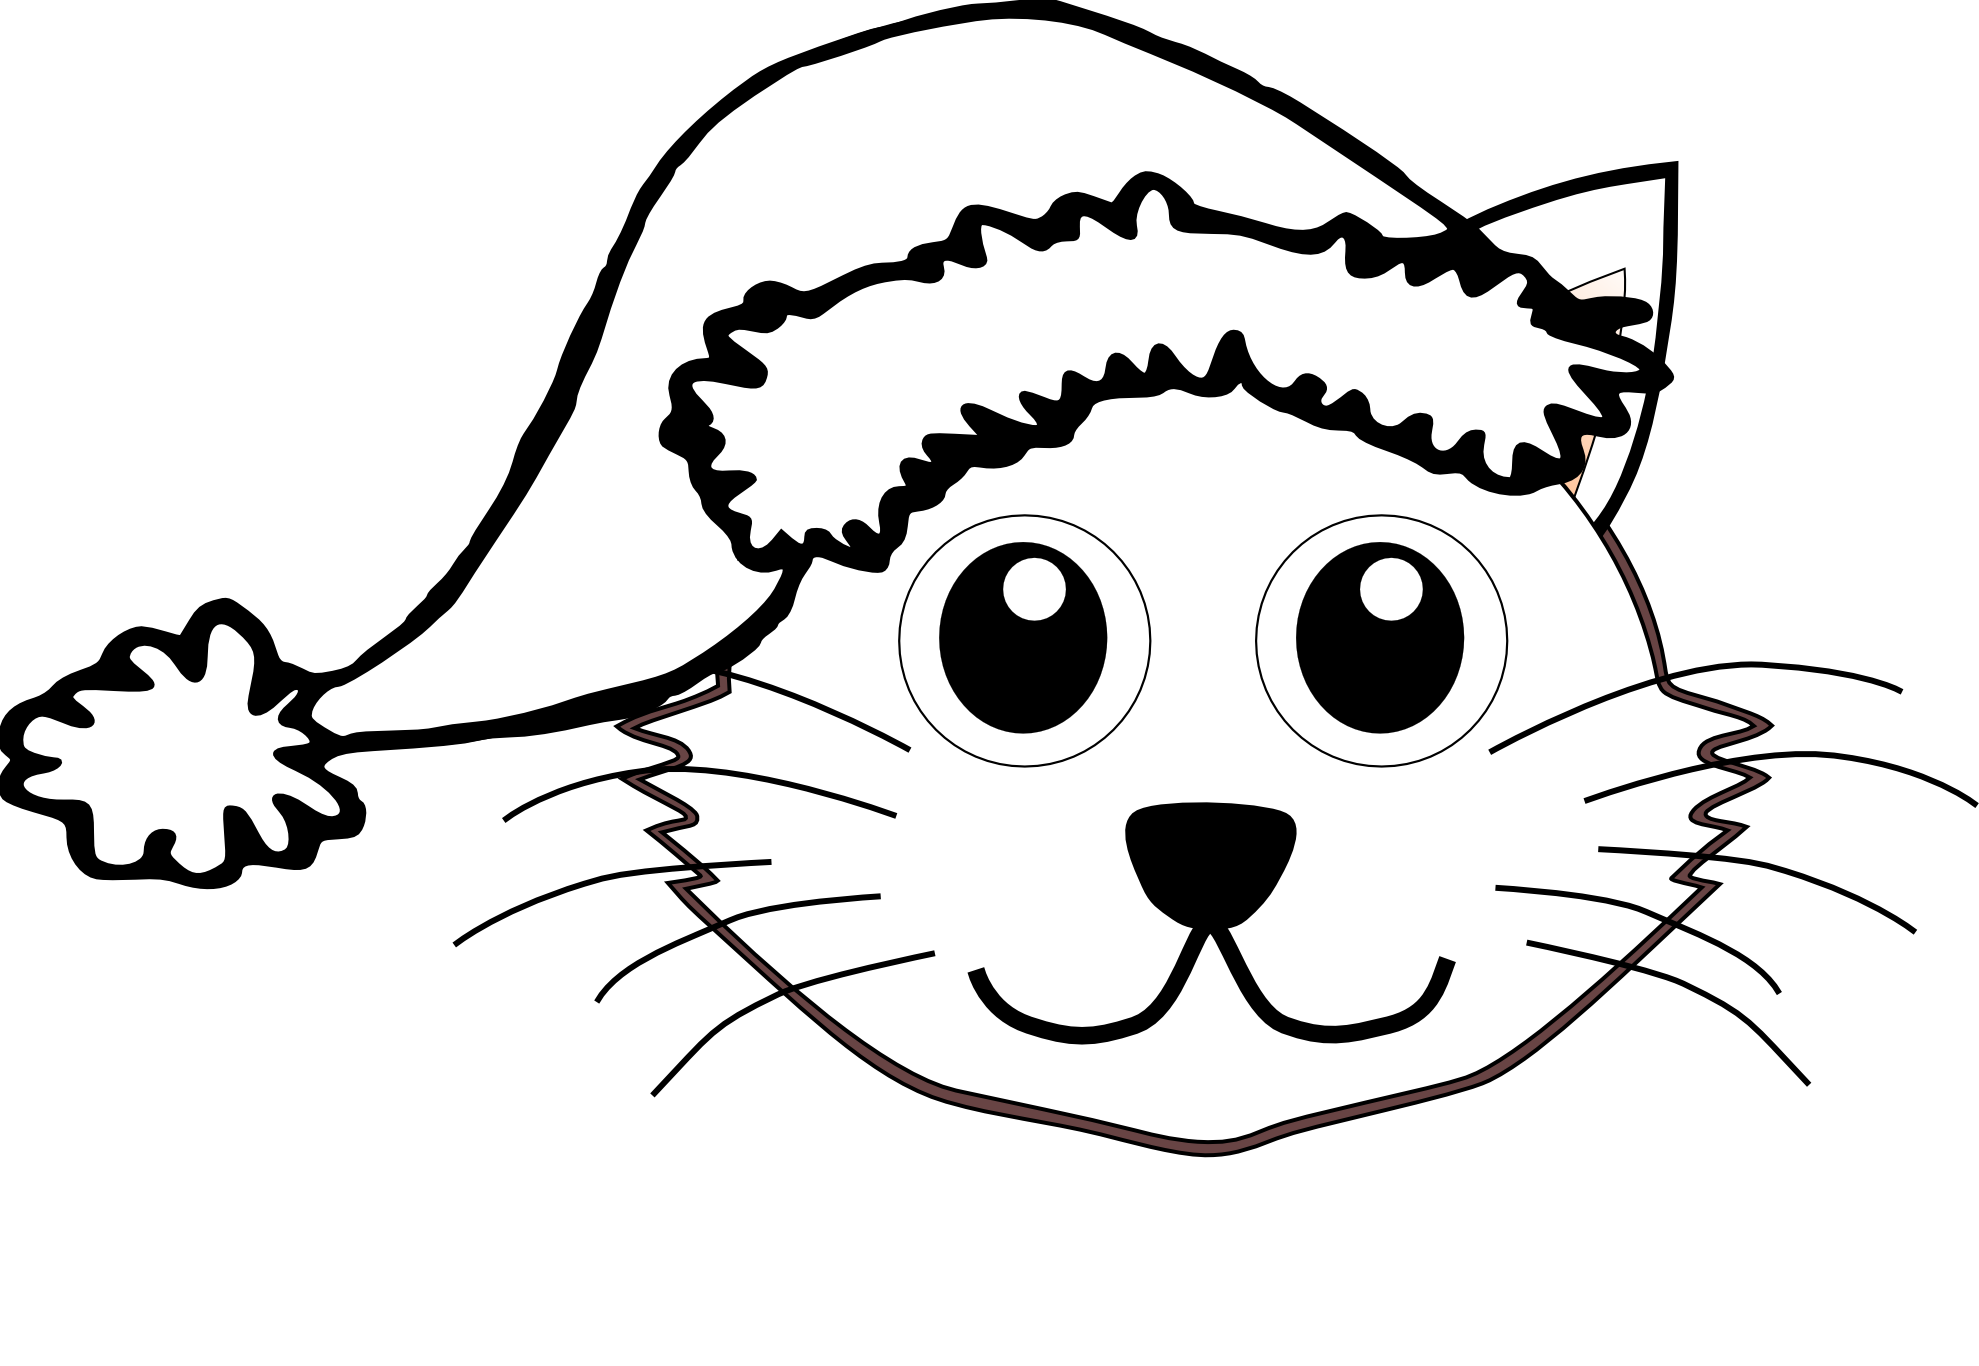 Black And White Cartoon Cat - ClipArt Best